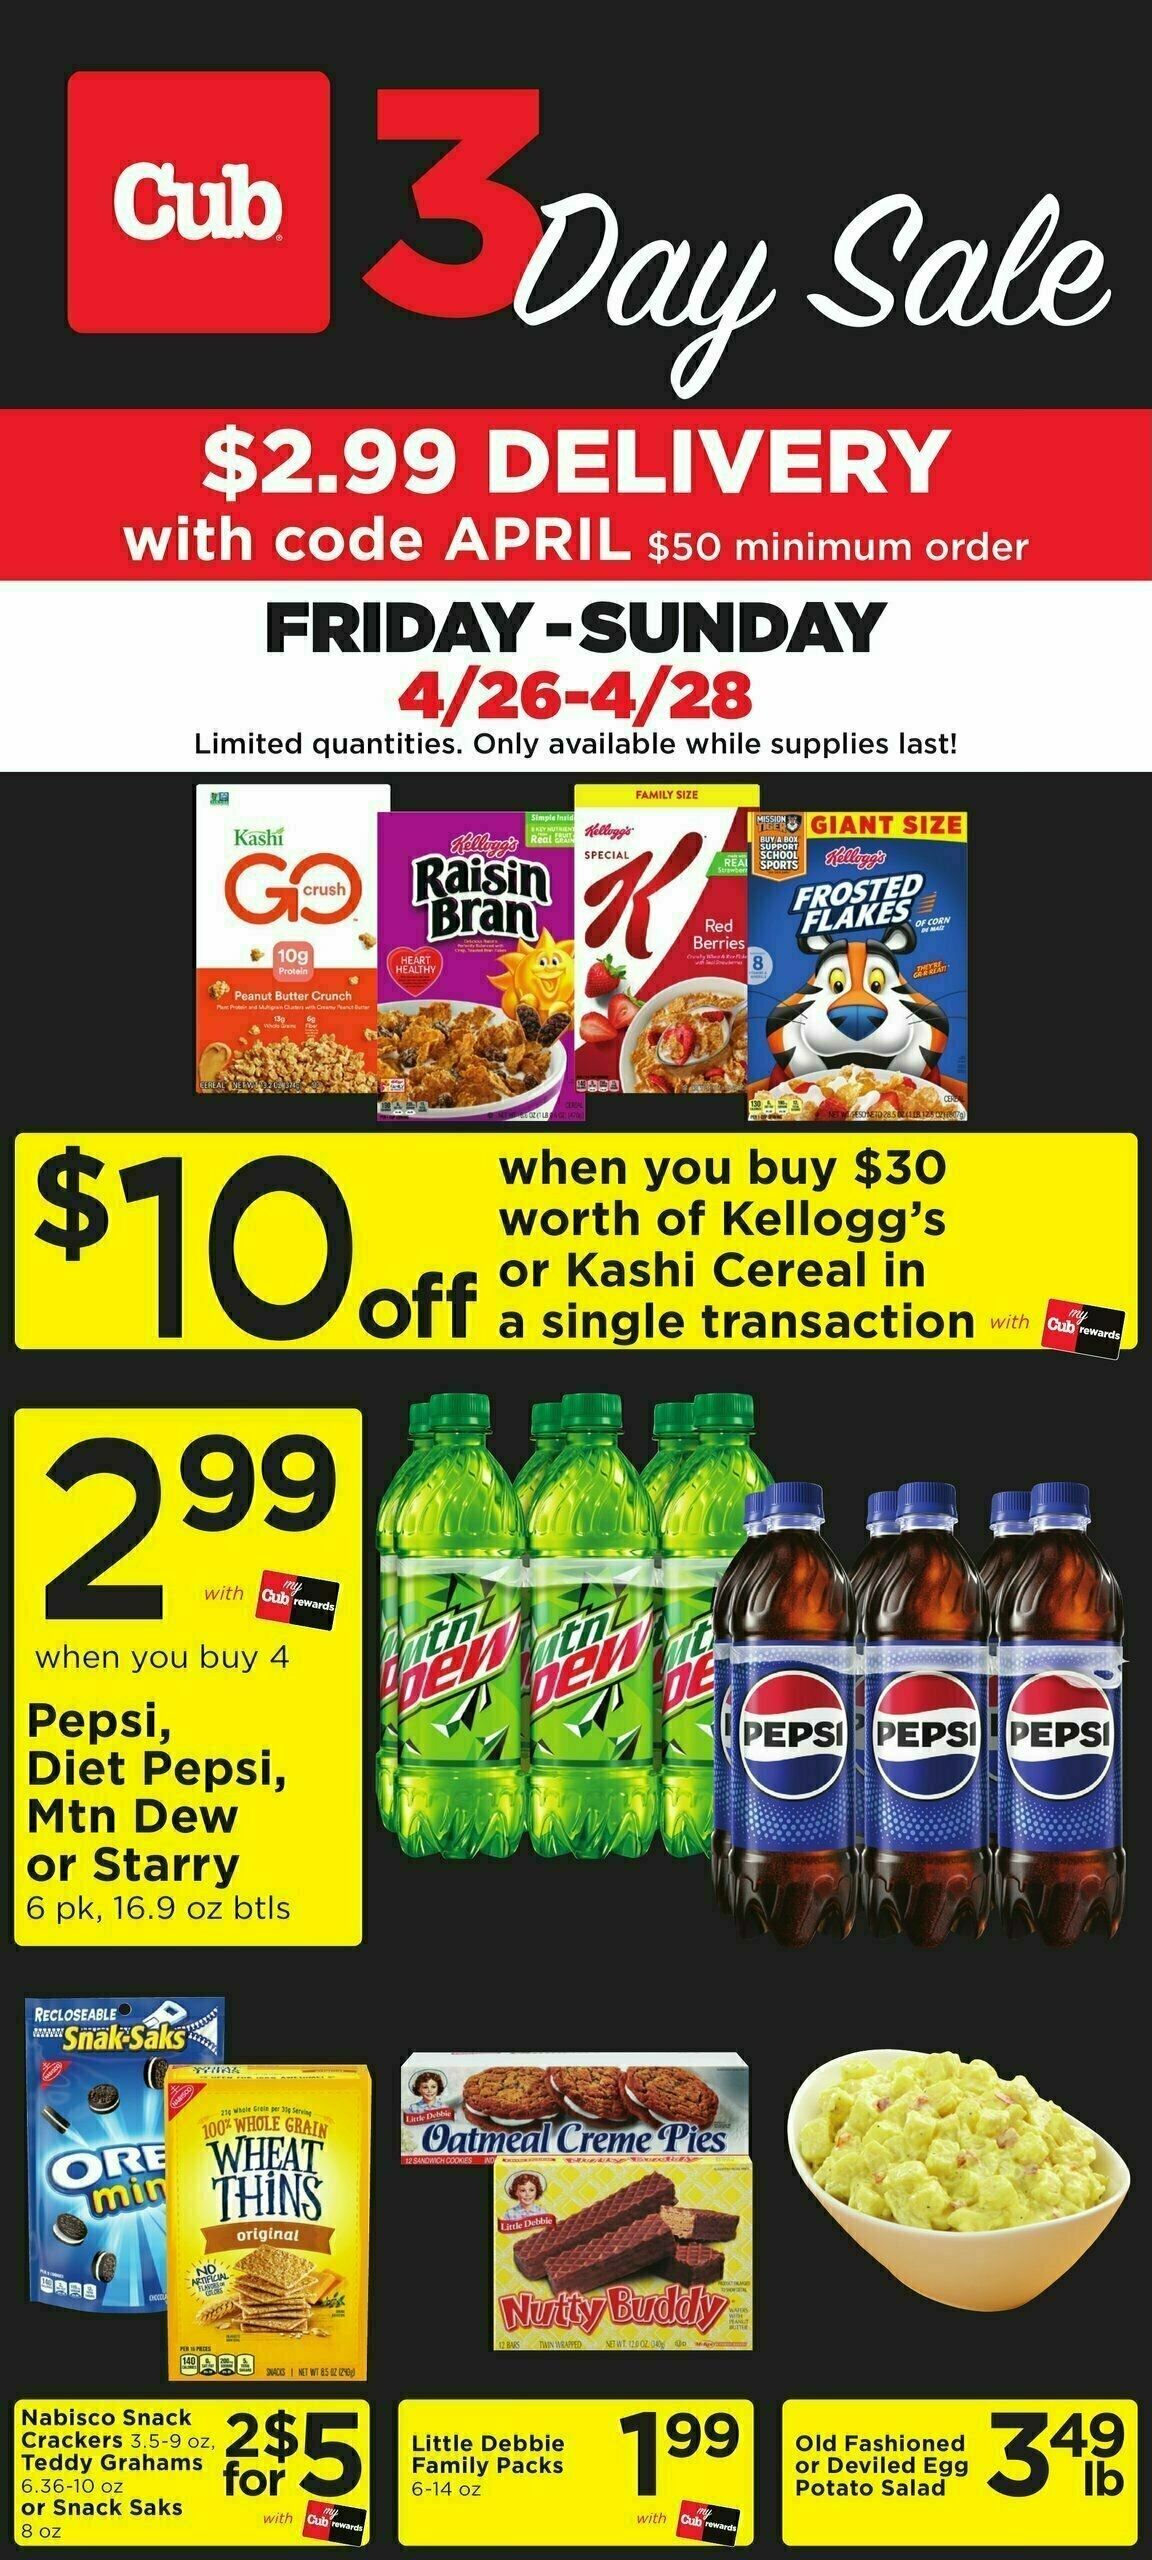 Cub Foods 3 Day Sale Weekly Ad from April 26